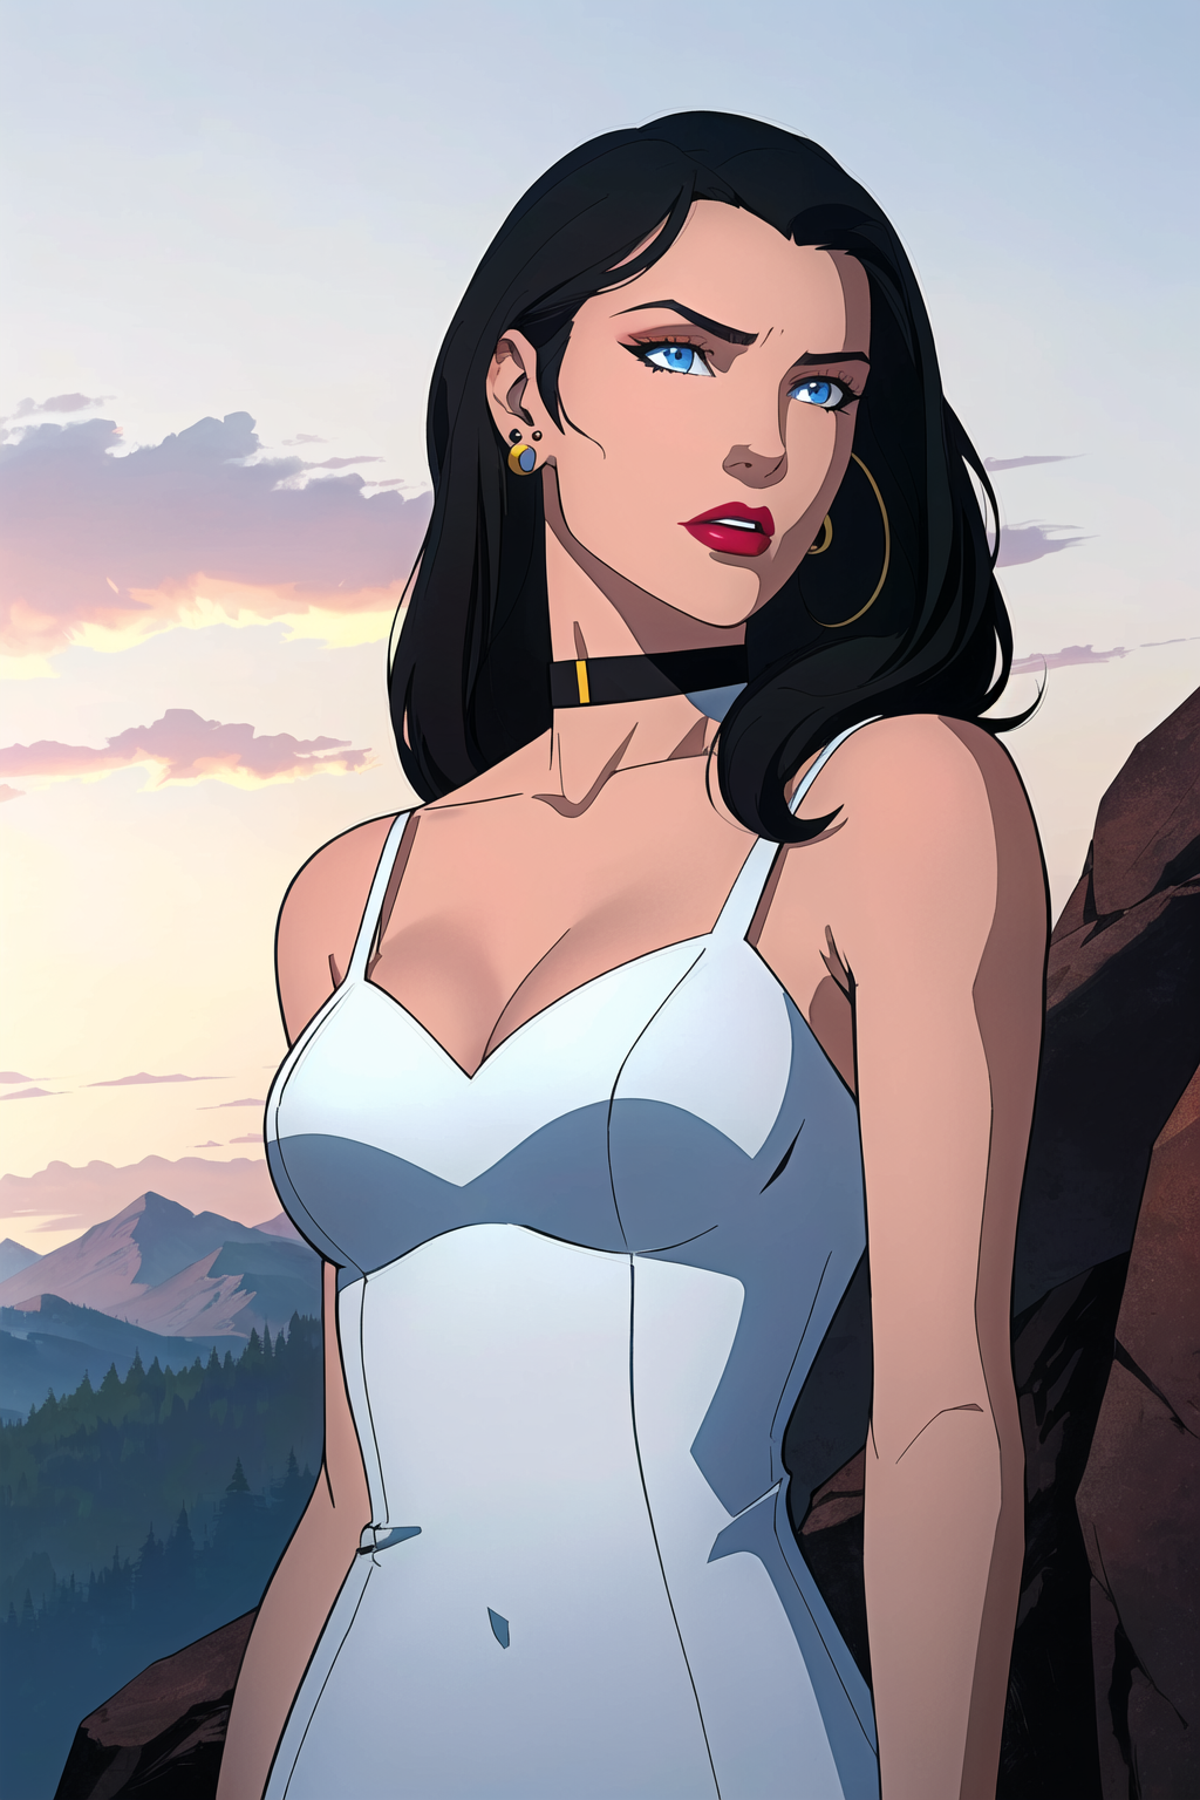 A cartoon drawing of a woman with blue eyes, wearing a white dress, with mountains in the background.